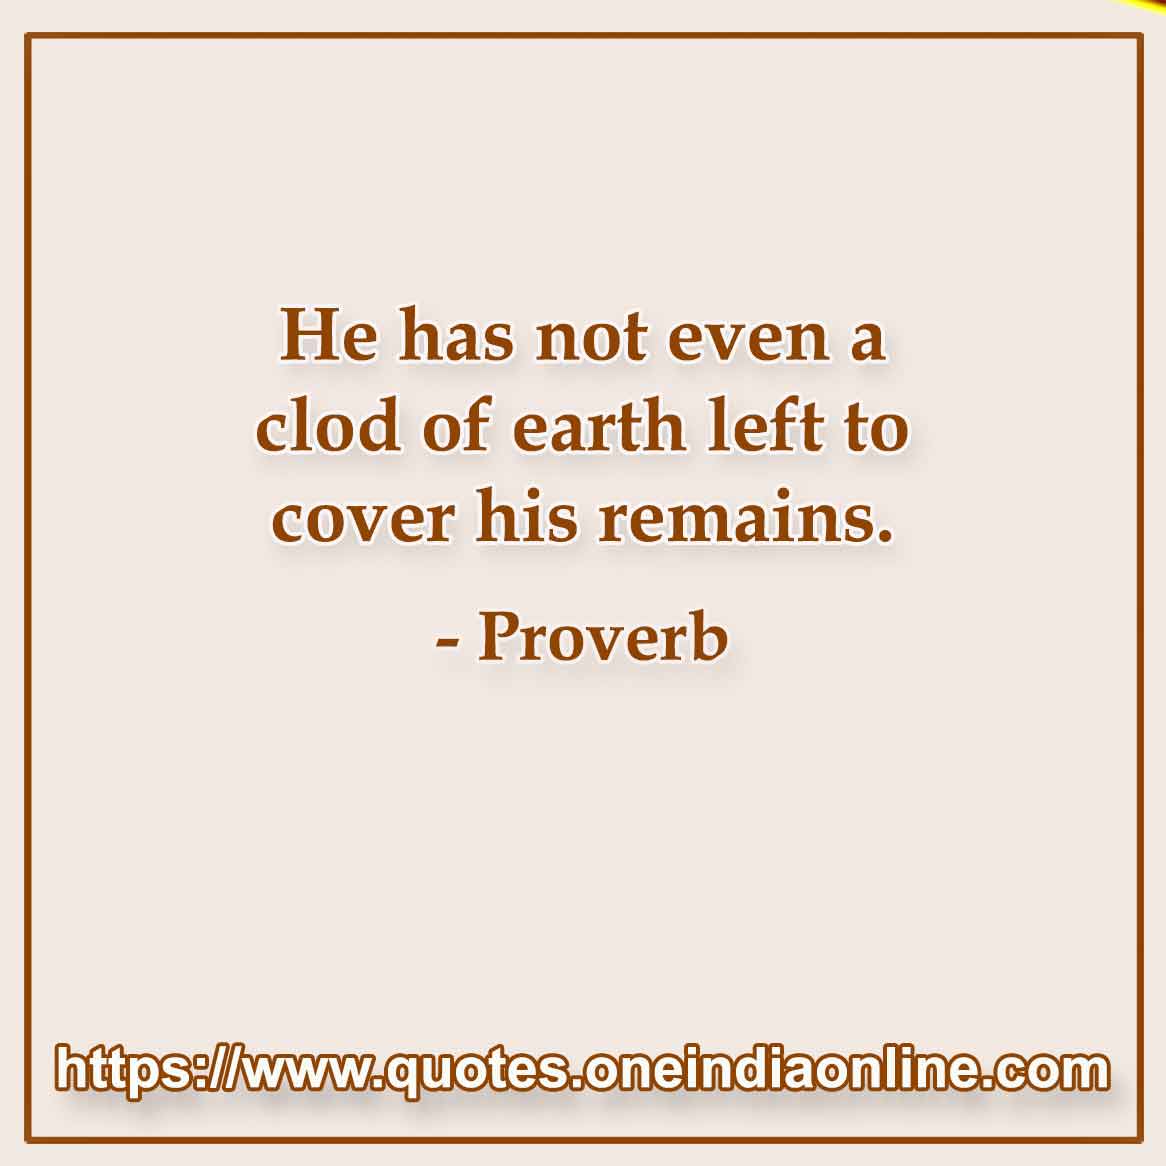 He has not even a clod of earth left to cover his remains.

 